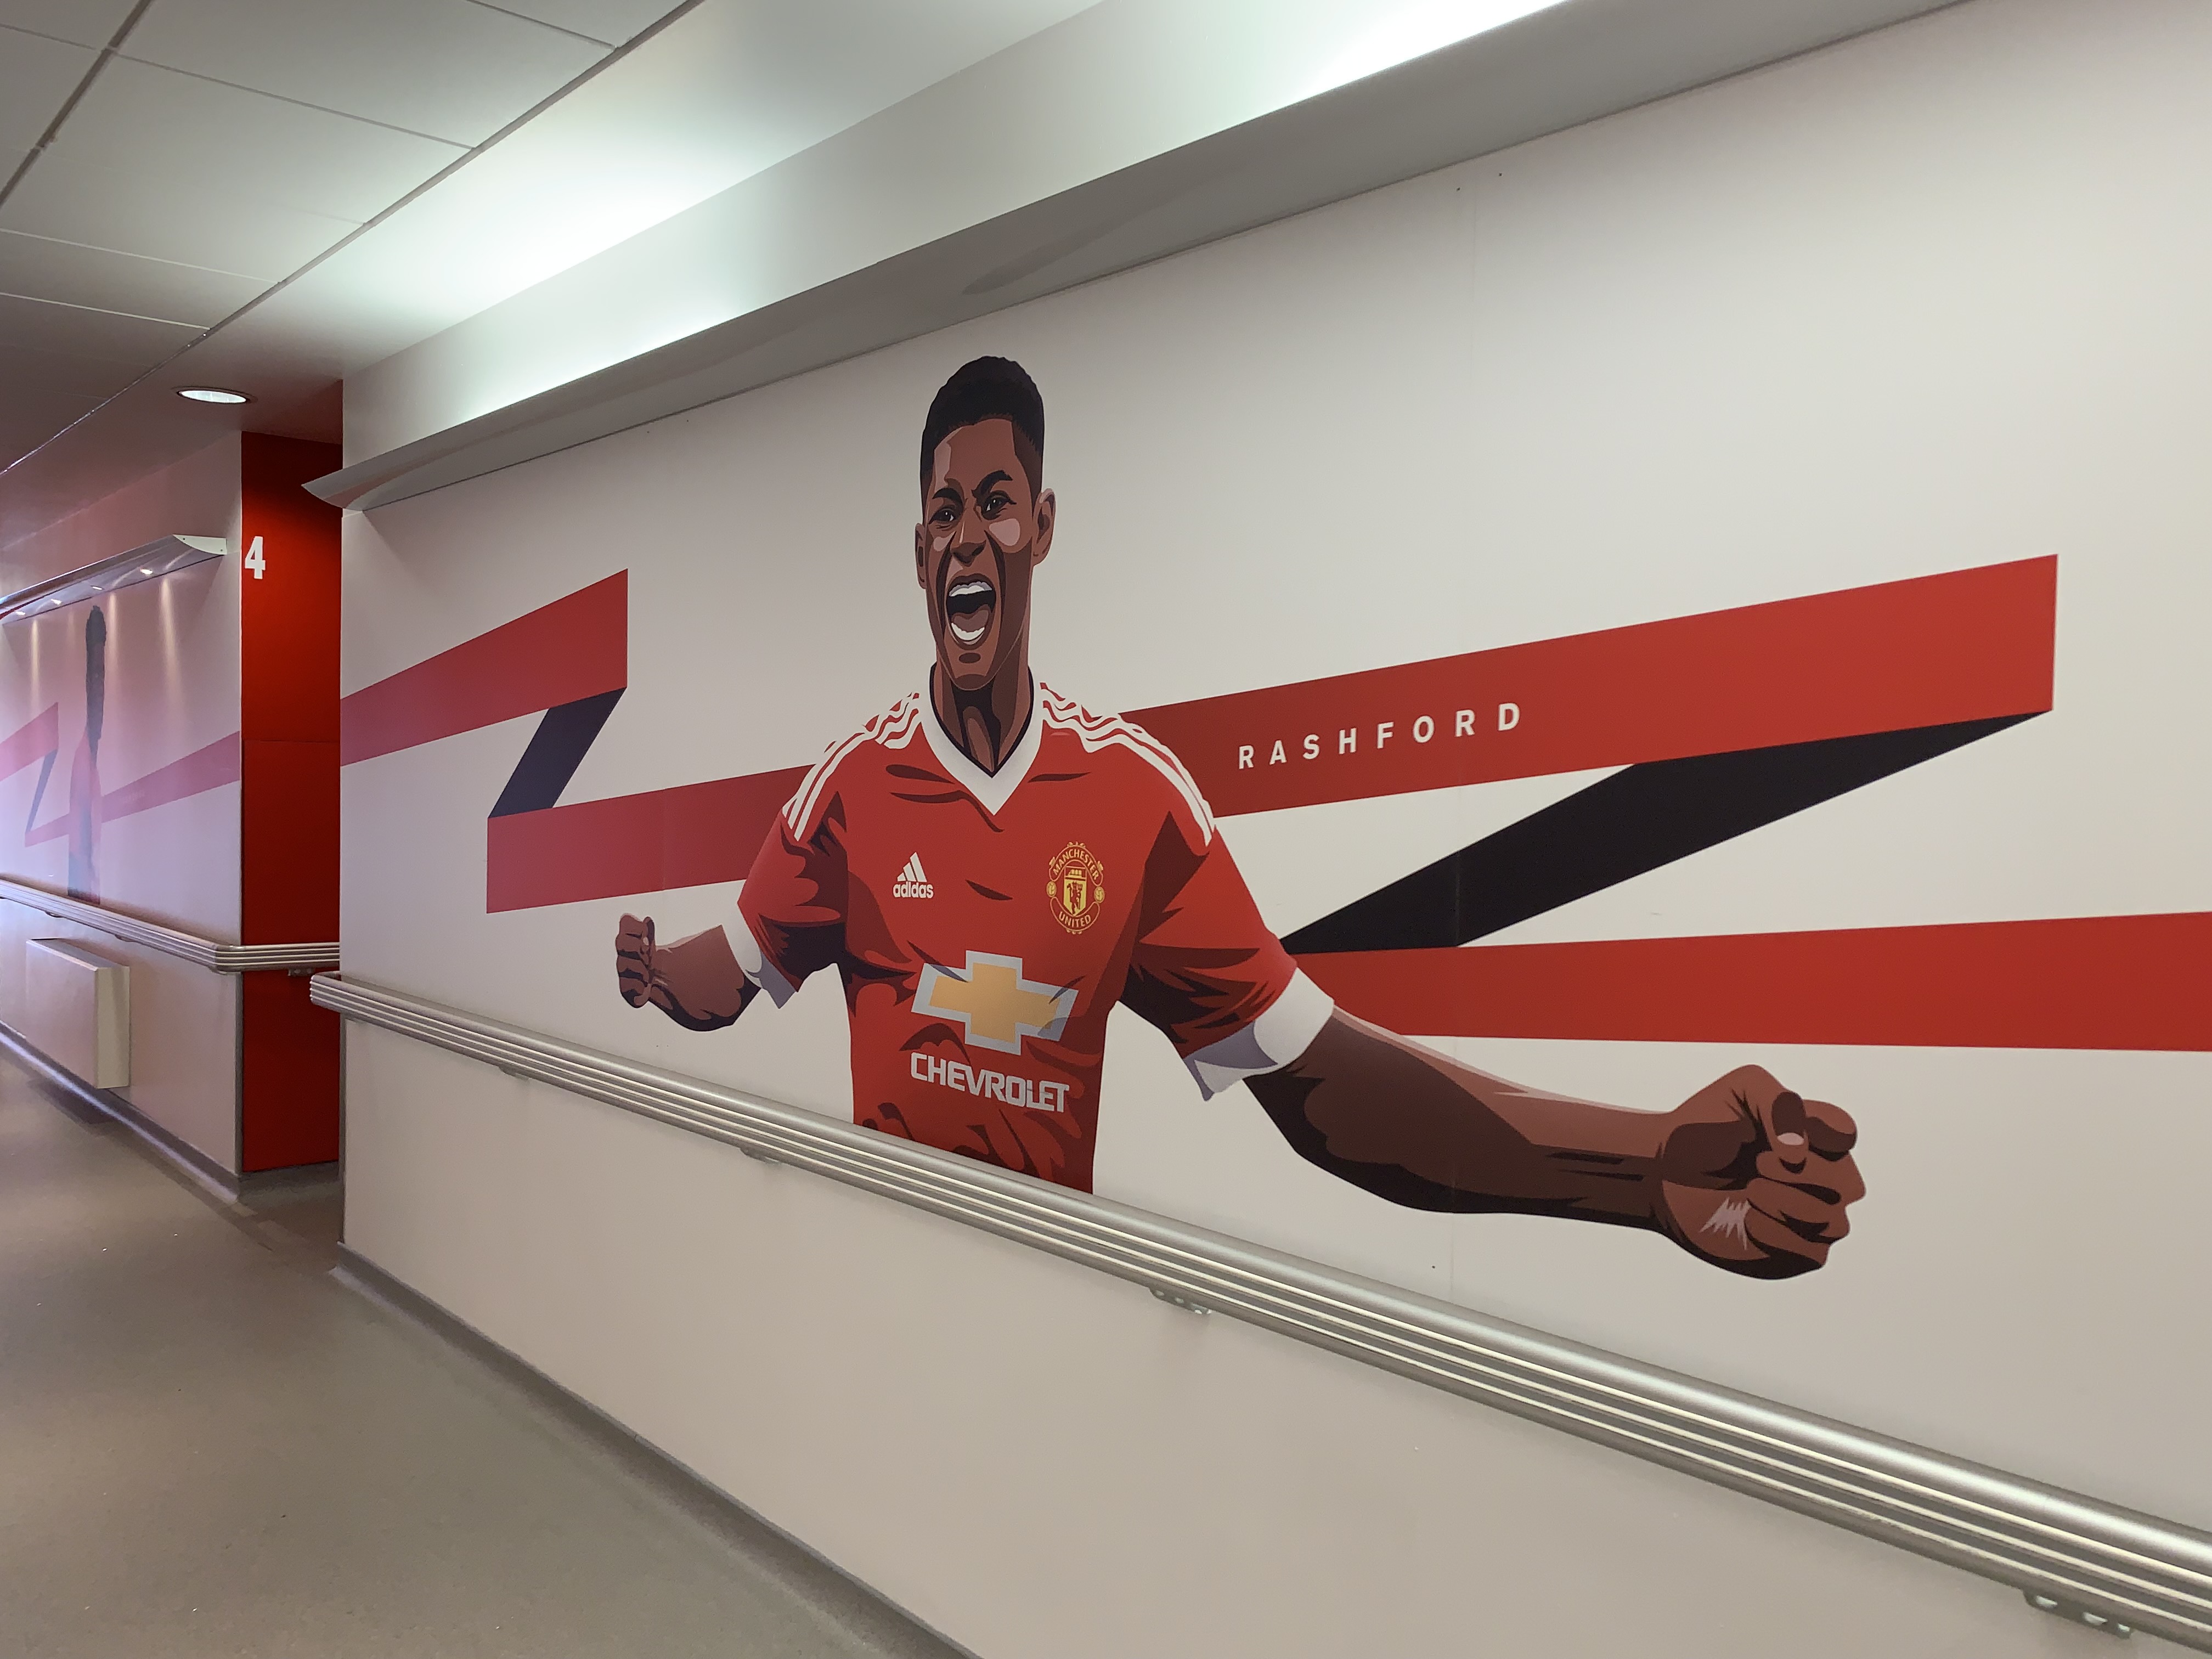 Image of Marcus Rashford on the wall at the Aon Training Complex